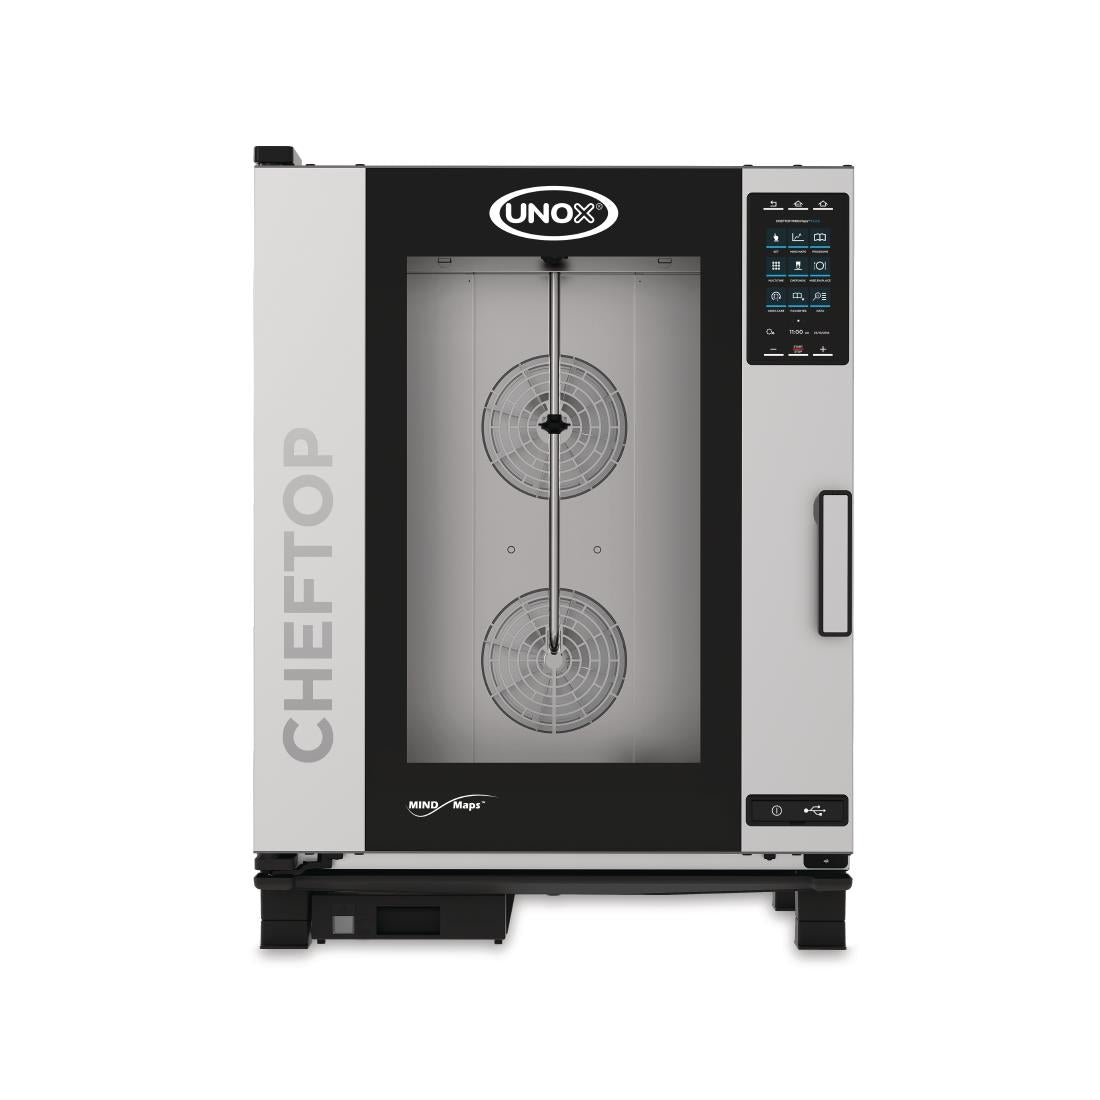 Unox Cheftop MIND Maps Plus Combi Oven 10 x GN 1/1 with Install